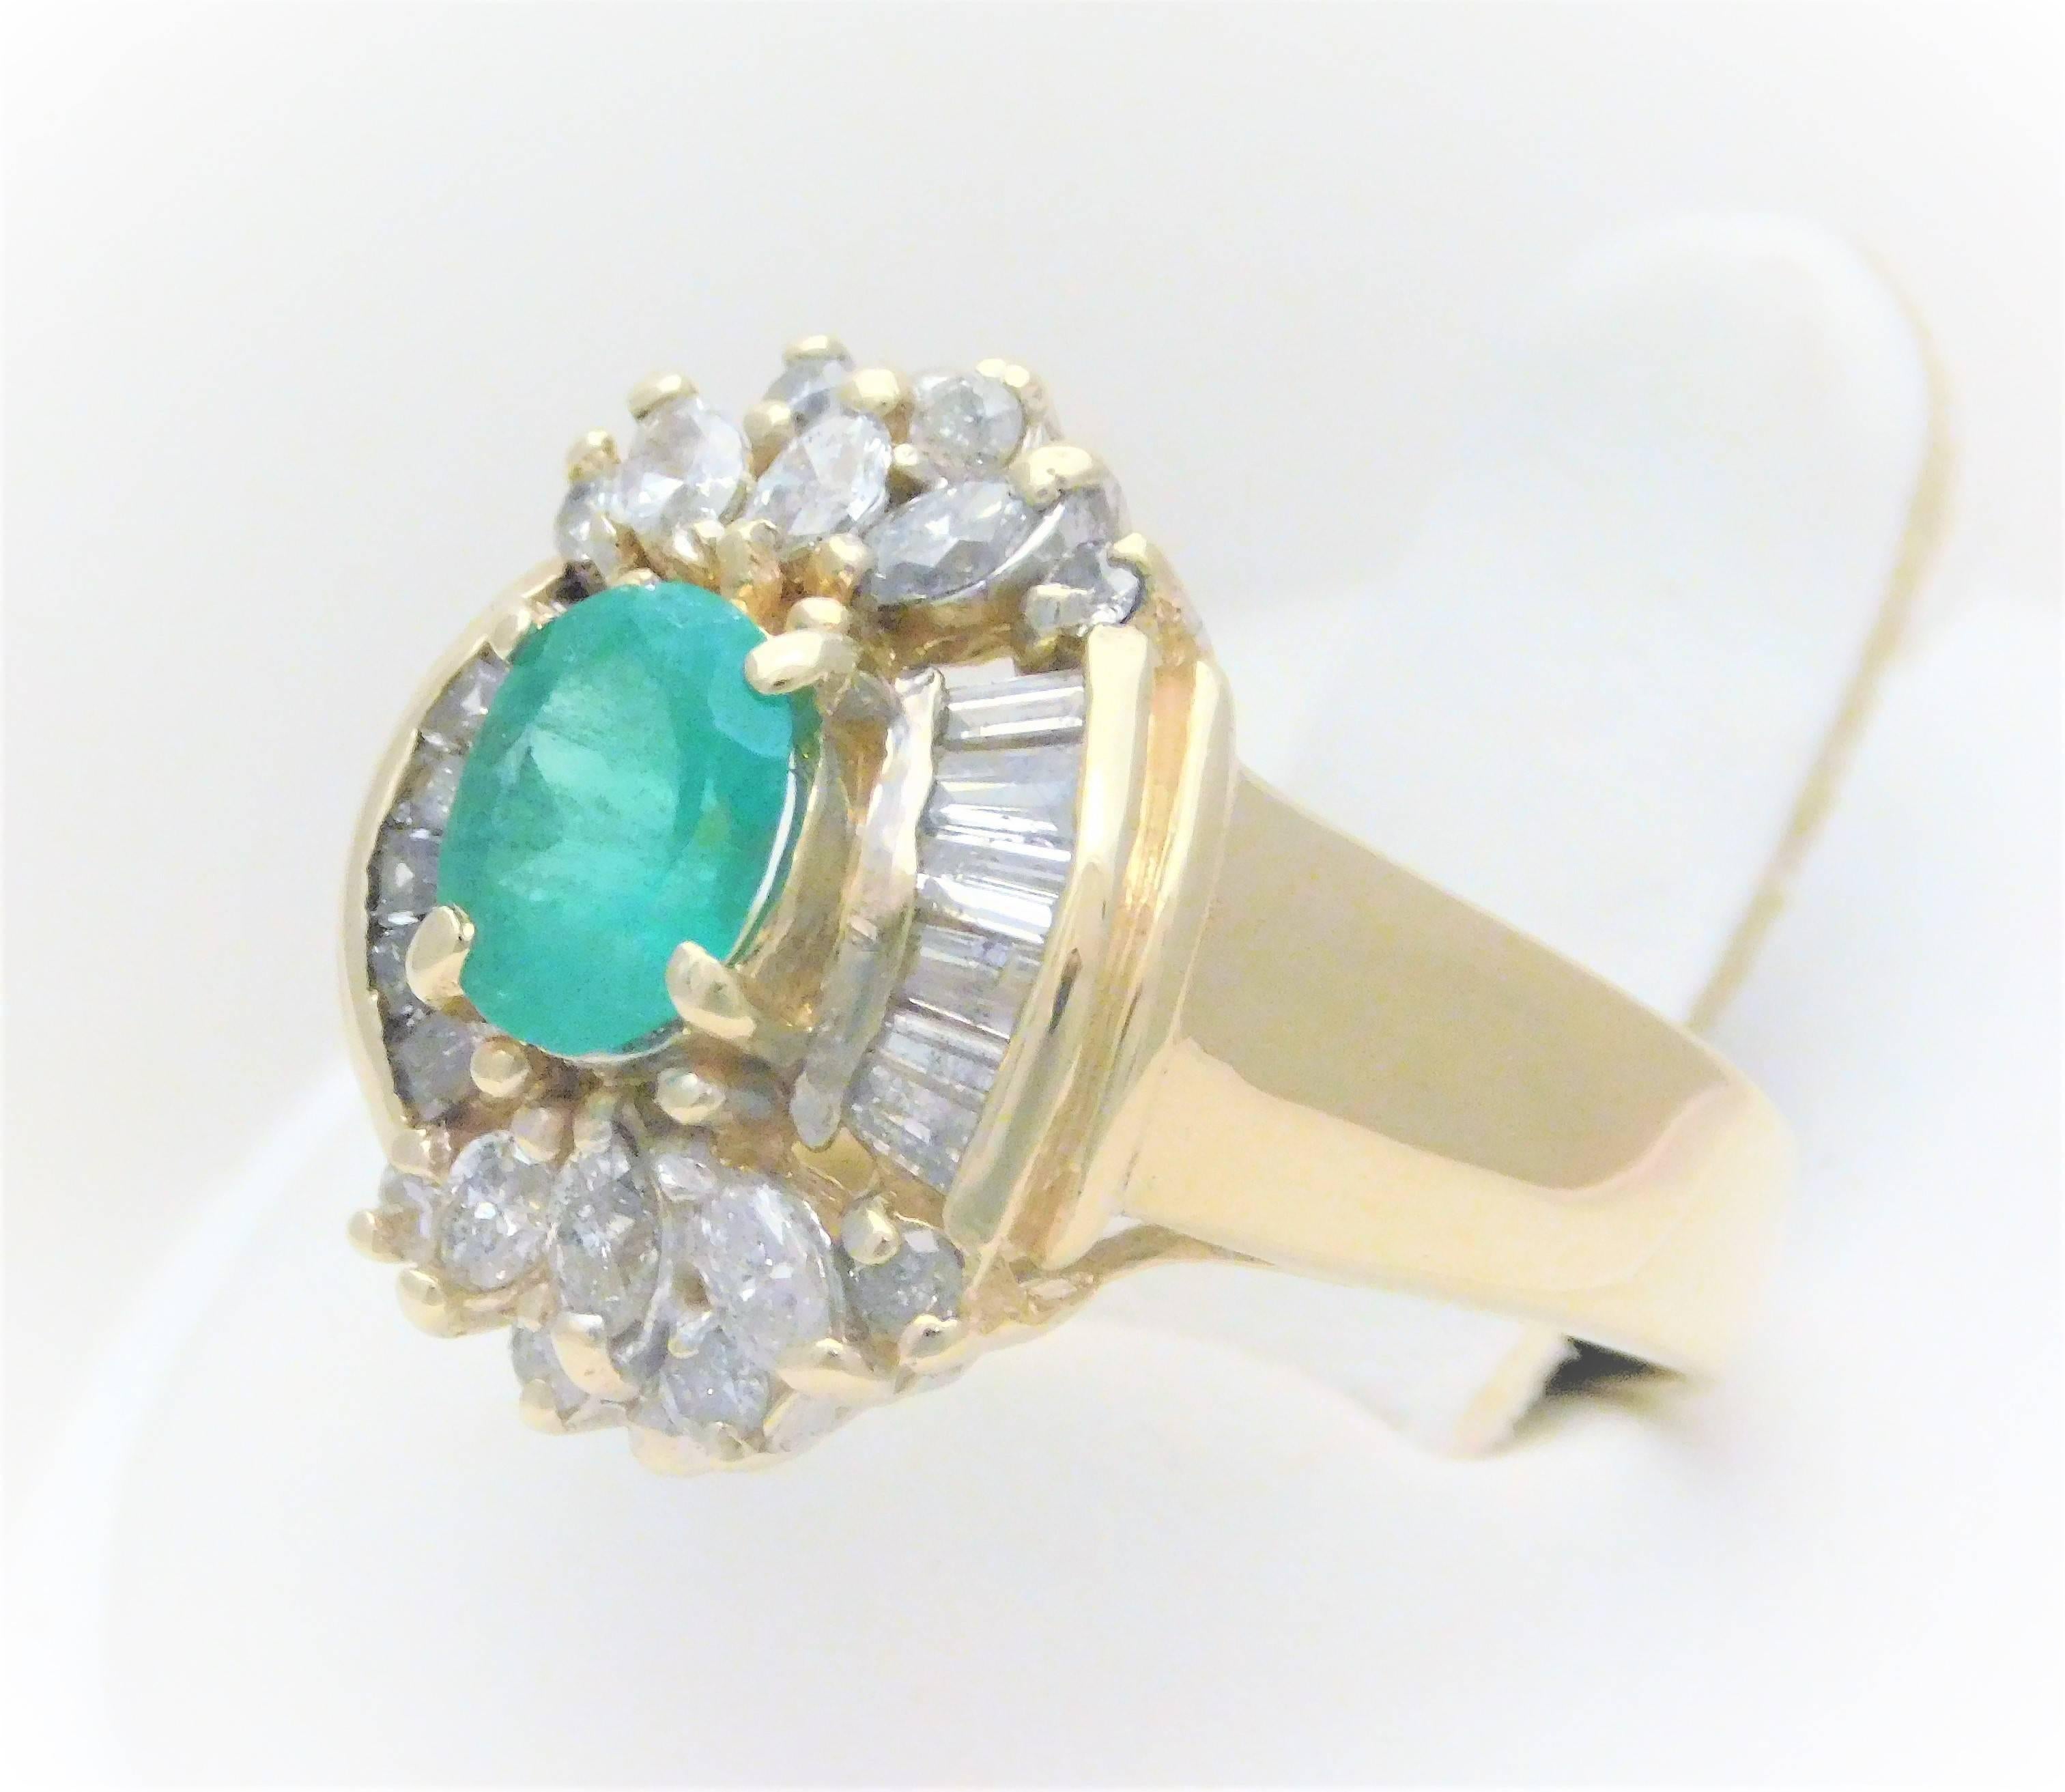 From a noble New Orleans estate.  Circa 1940-1950.  This exquisite ring has been hand crafted in solid 14k yellow gold with a polished finish.  It features a beautiful green oval faceted natural emerald approximating 1ct in weight.  Flanking this